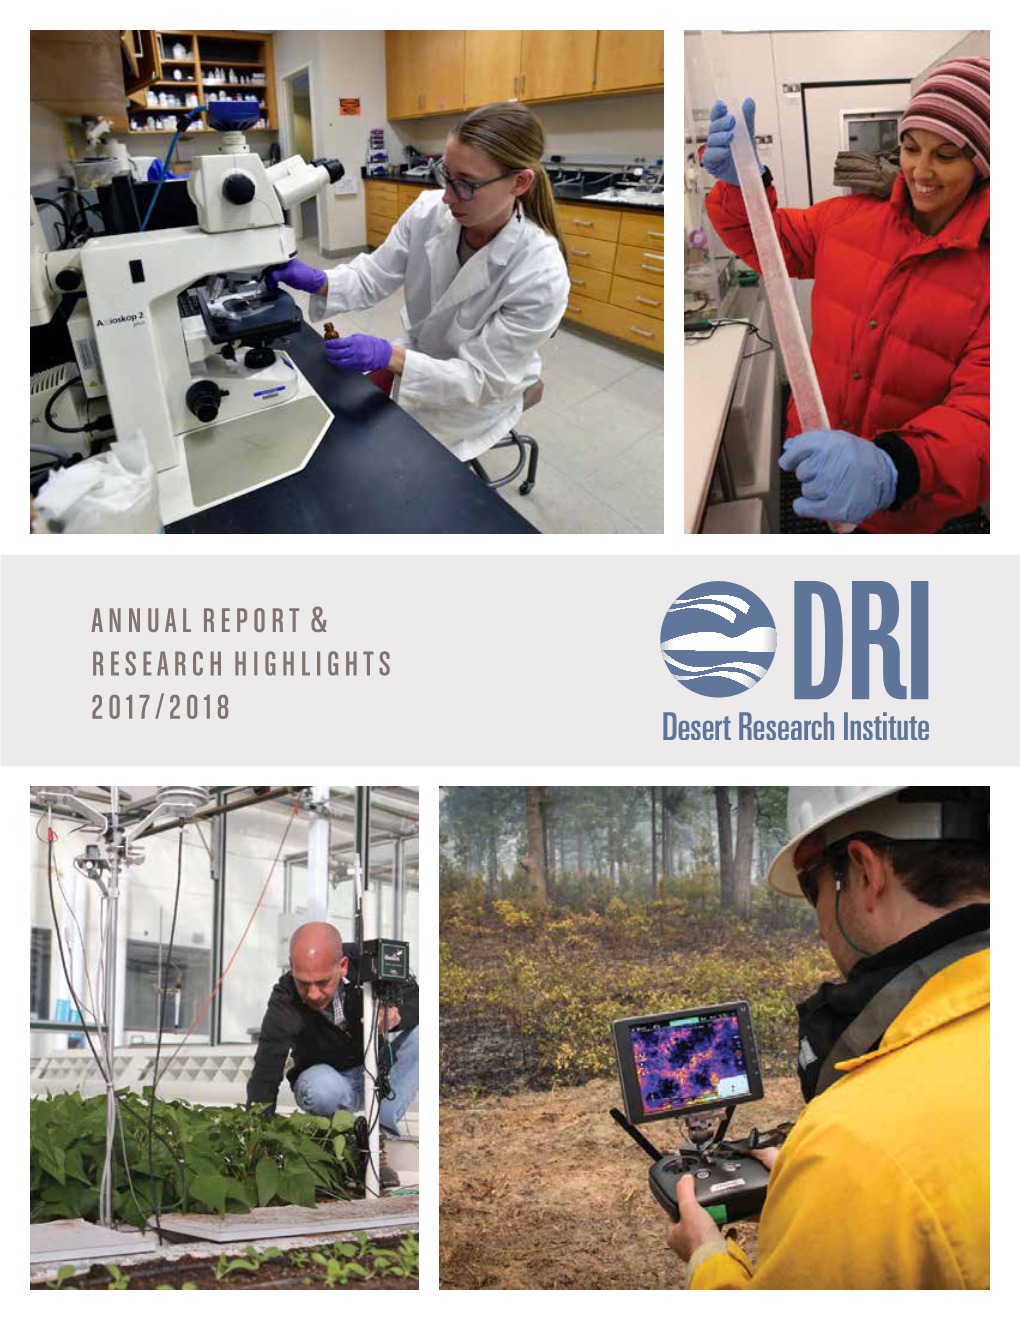 Annual Report & Research Highlights 2017/2018